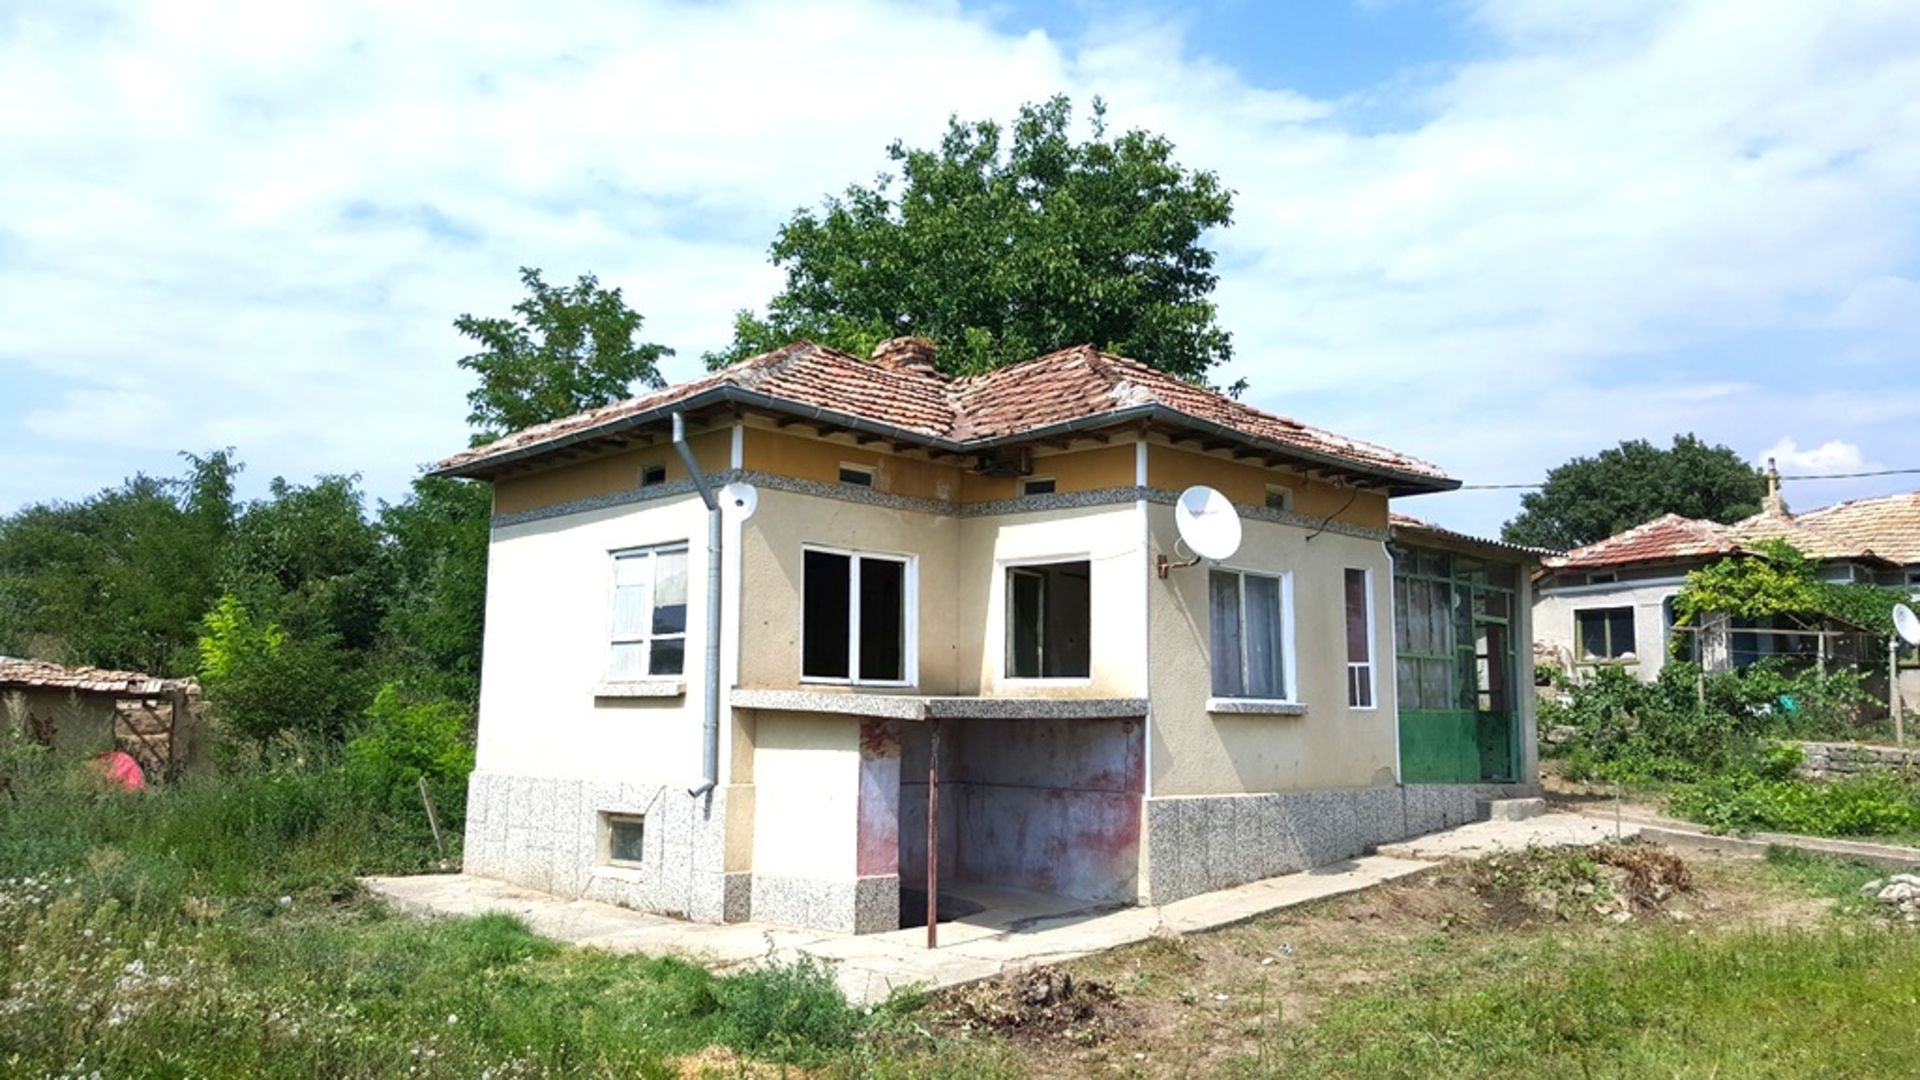 Sunny Bulgarian cottage 30 miles from beaches   Here is a great opportunity to snap up a well- - Image 6 of 26